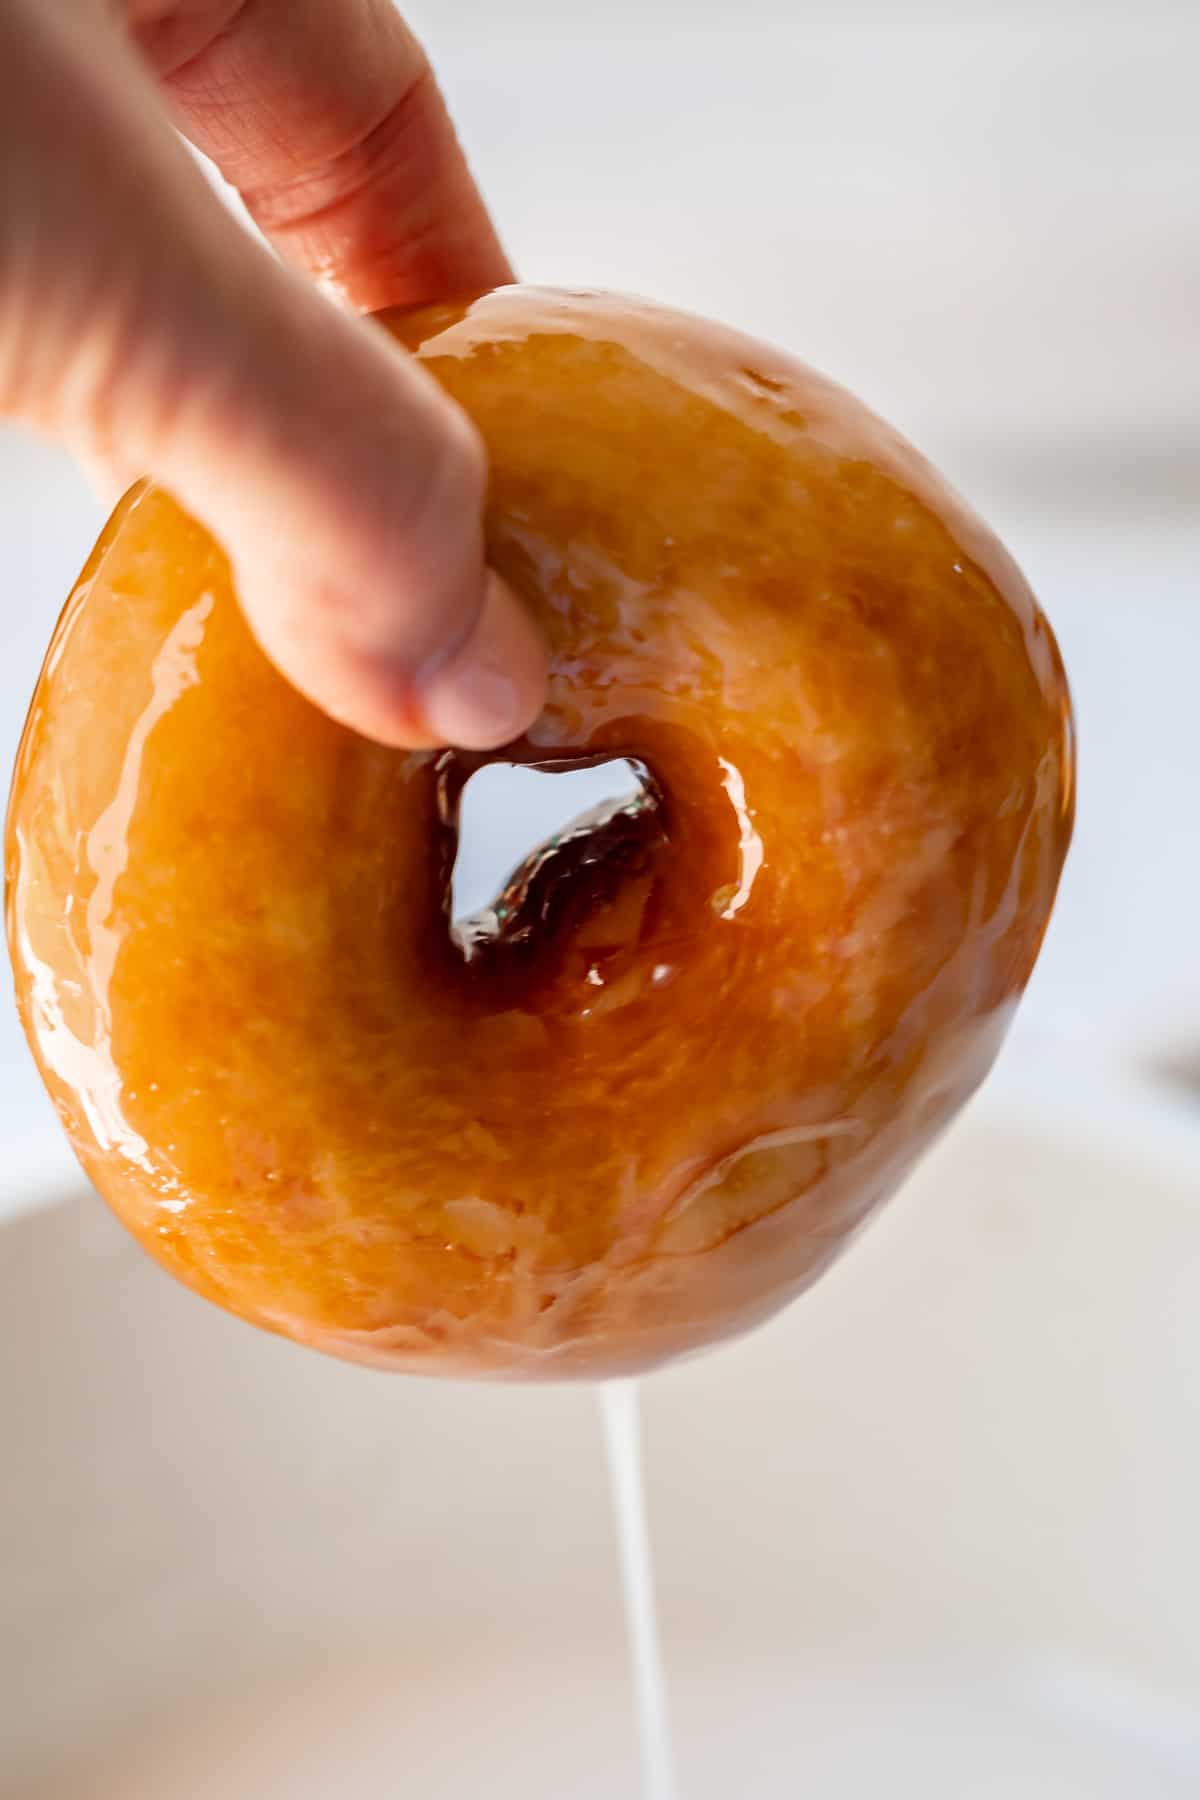 fingers pulling a donut fully coated in glaze out of the glaze bowl and letting the extra drip down.